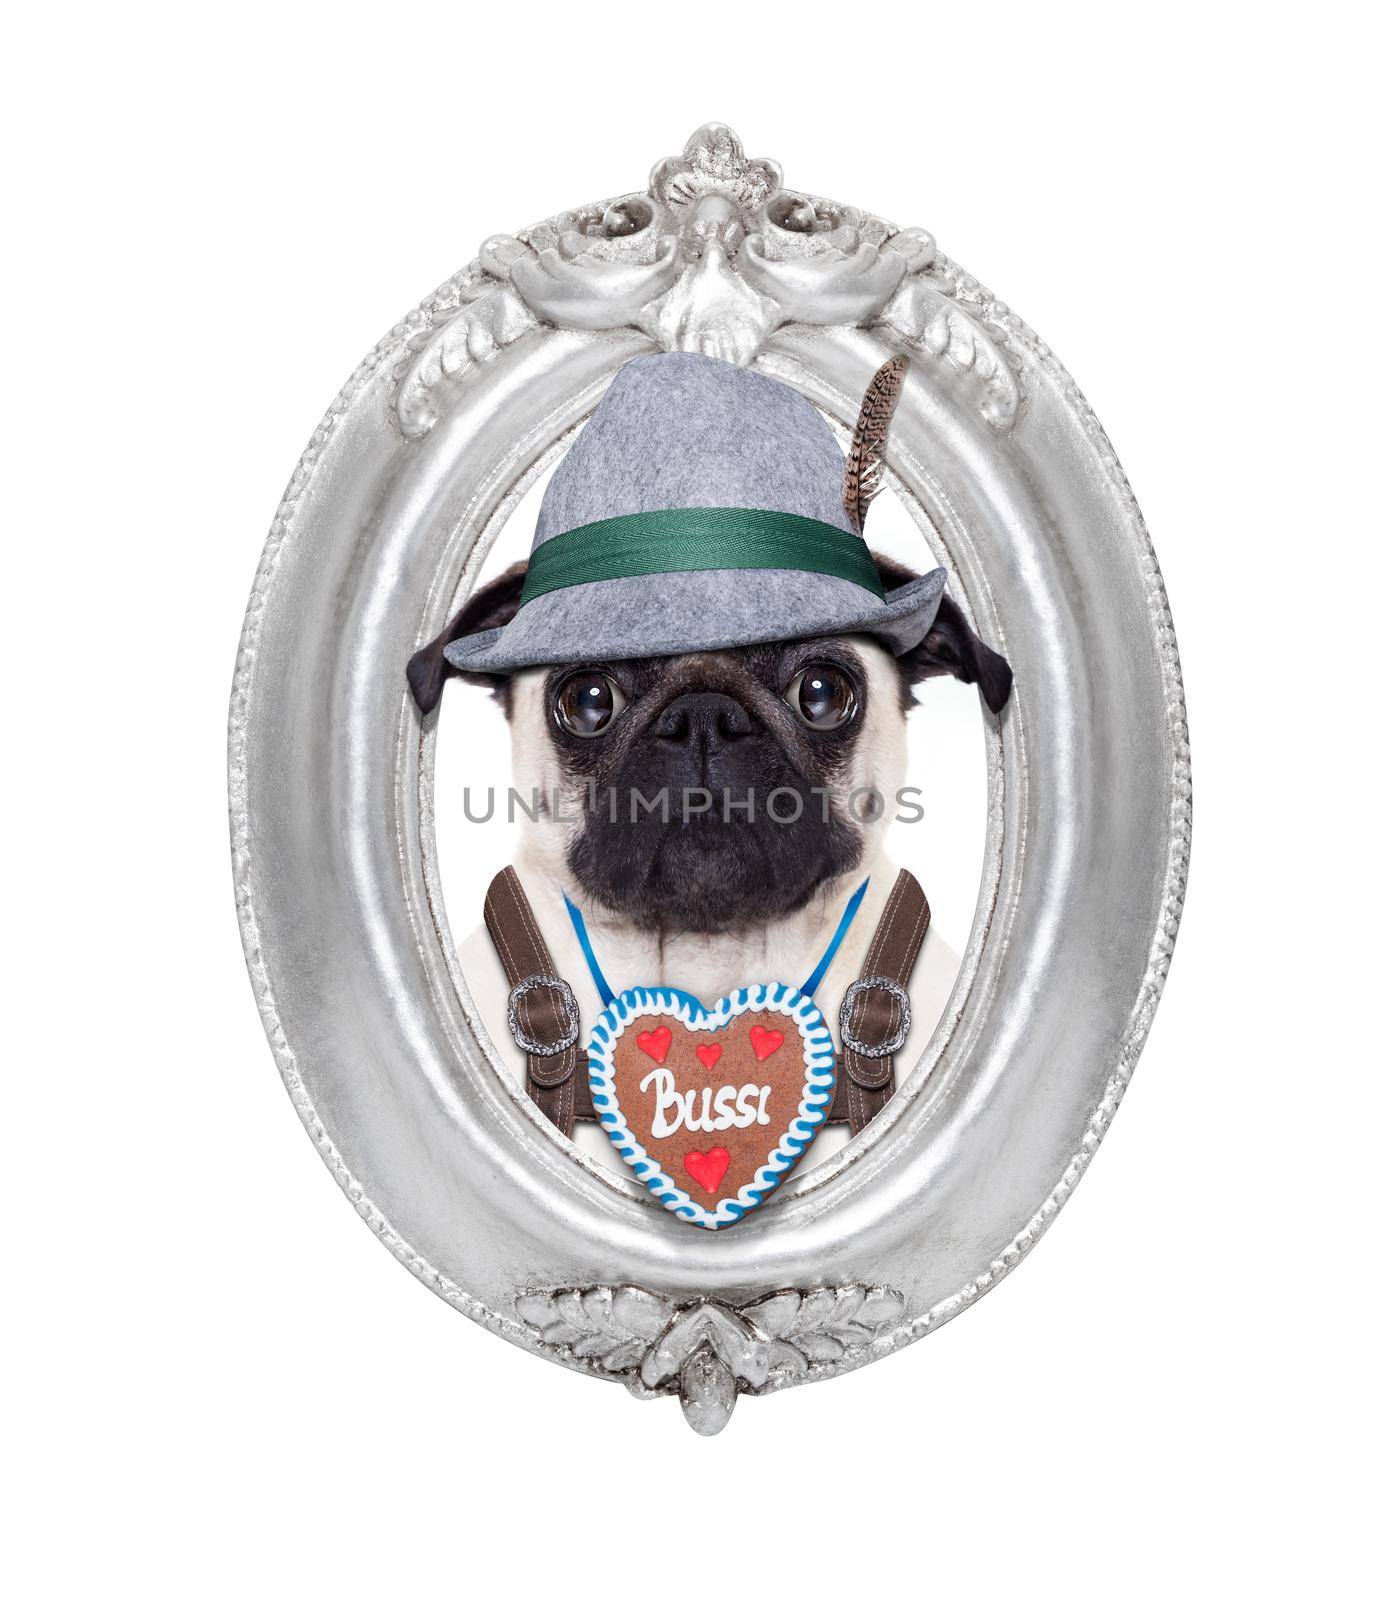 pug dog dressed up as bavarian,isolated on white background,with peace or victory fingers